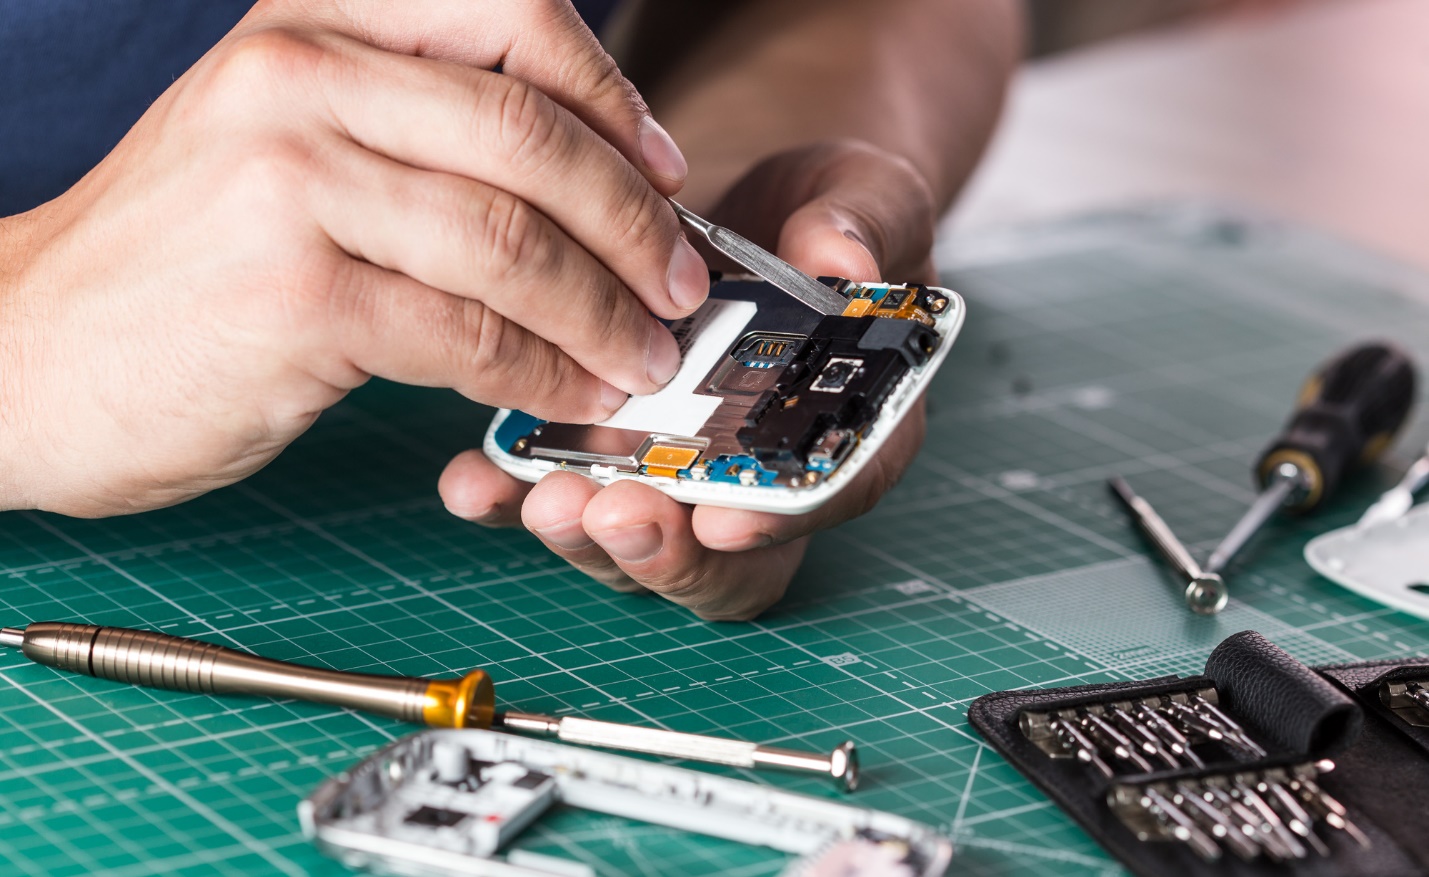 Phone Repair Shop: What You Need to Know Before You Go - Techno FAQ